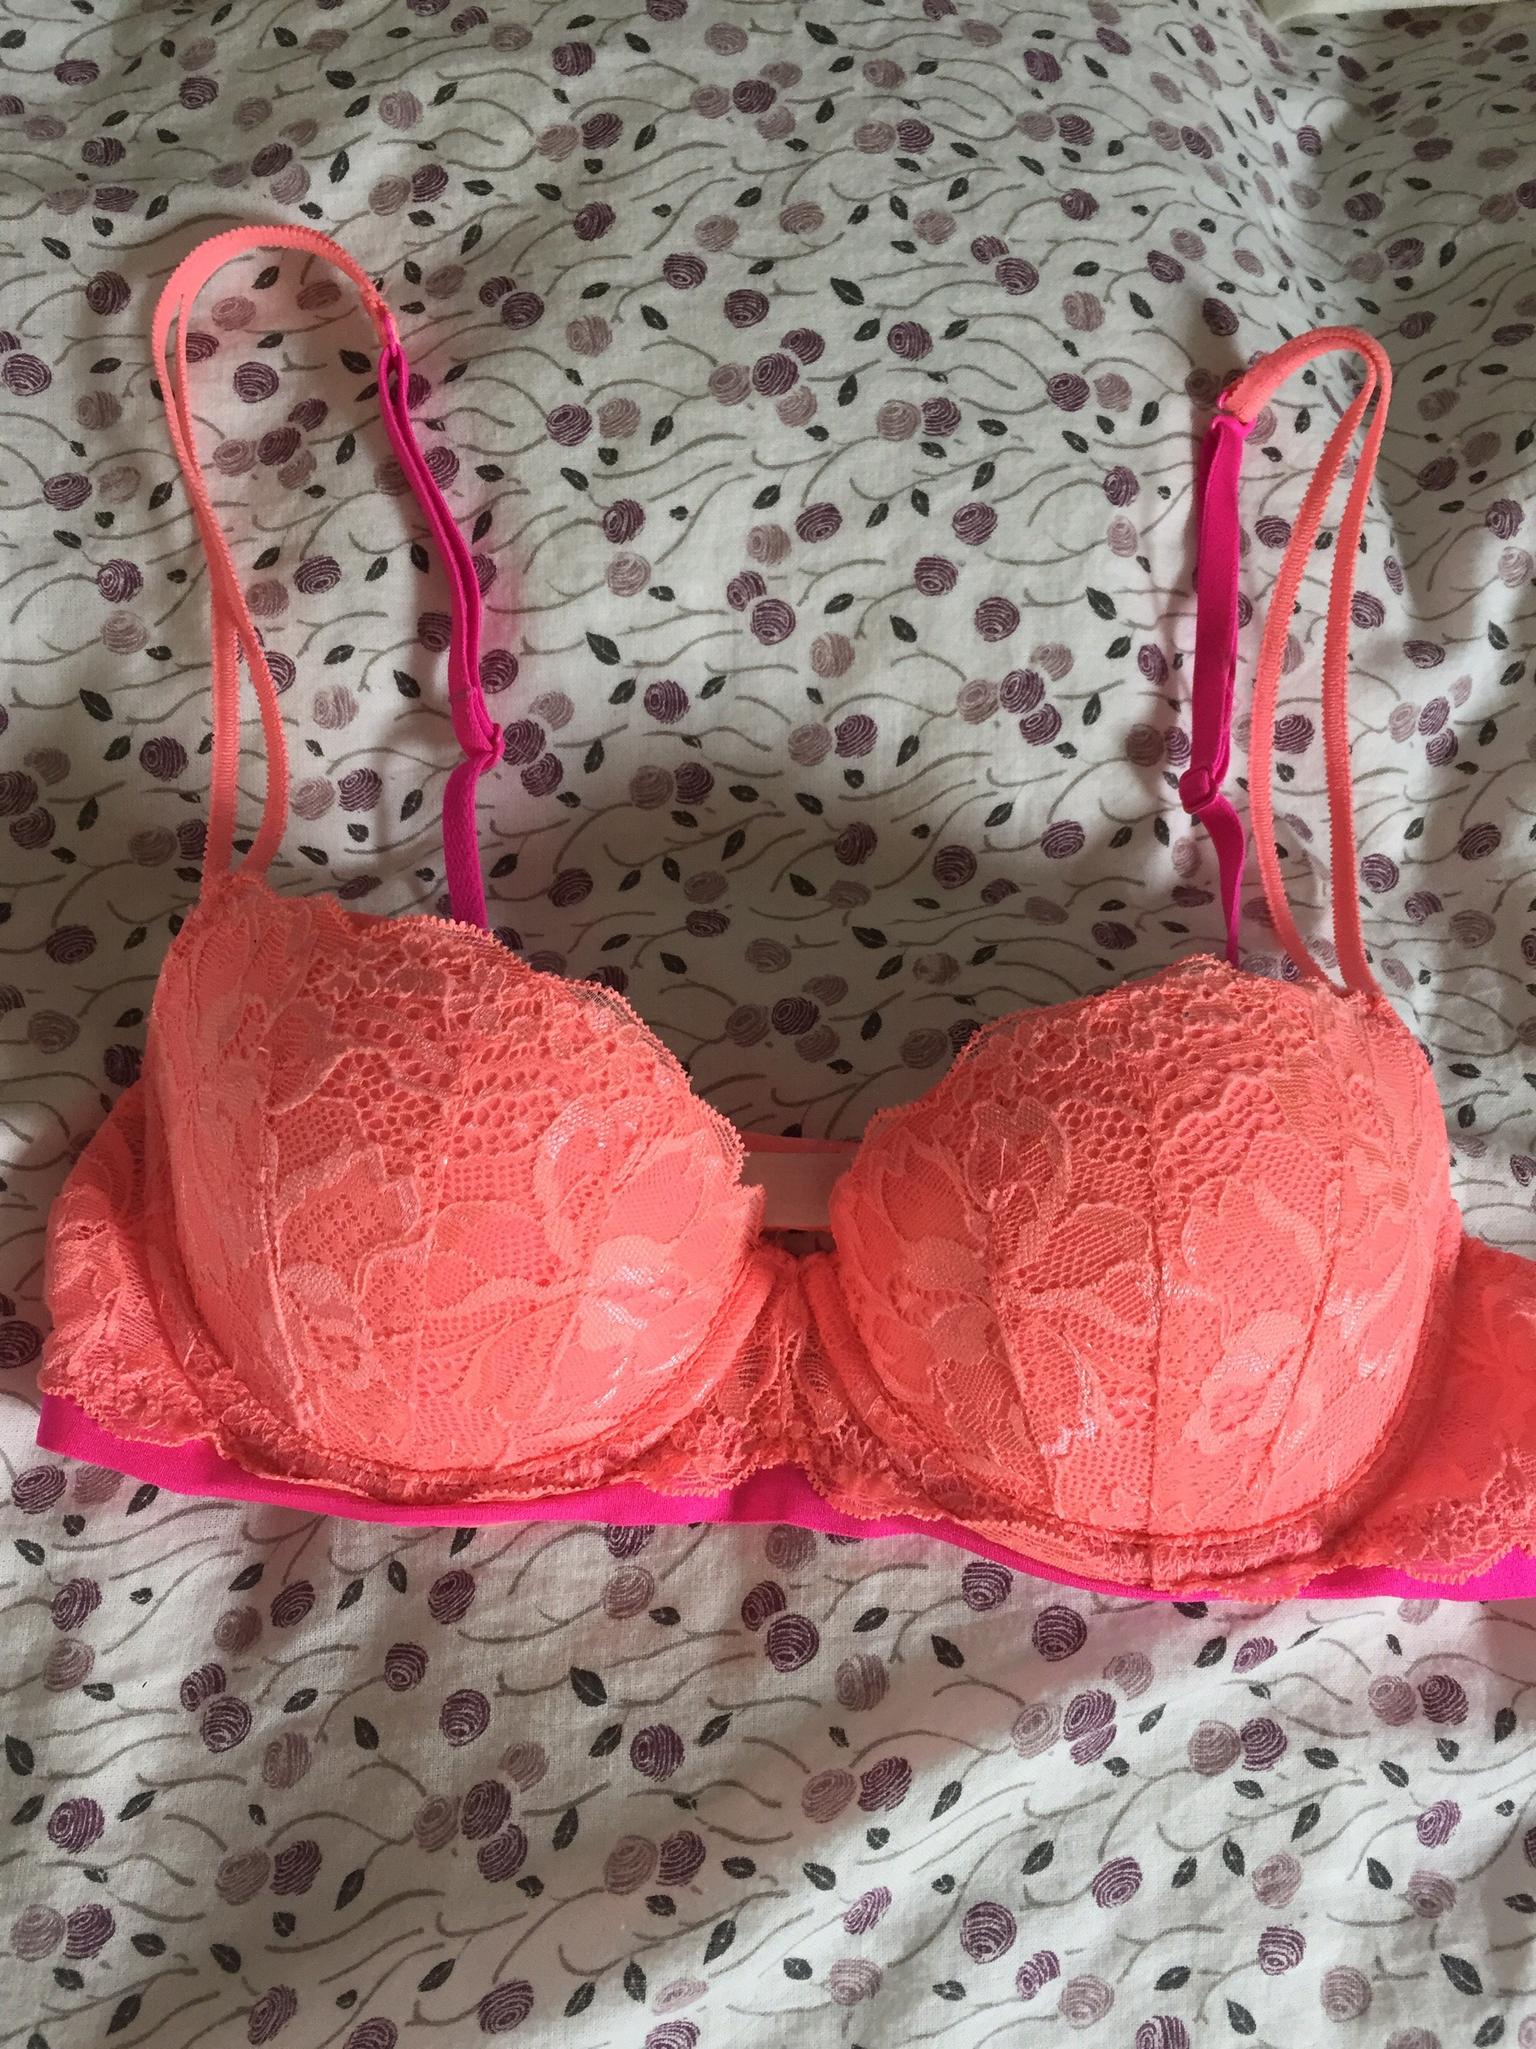 Victoria S Secret Bh 75a Spitze Apricot Pink In Schellweiler For 19 00 For Sale Shpock